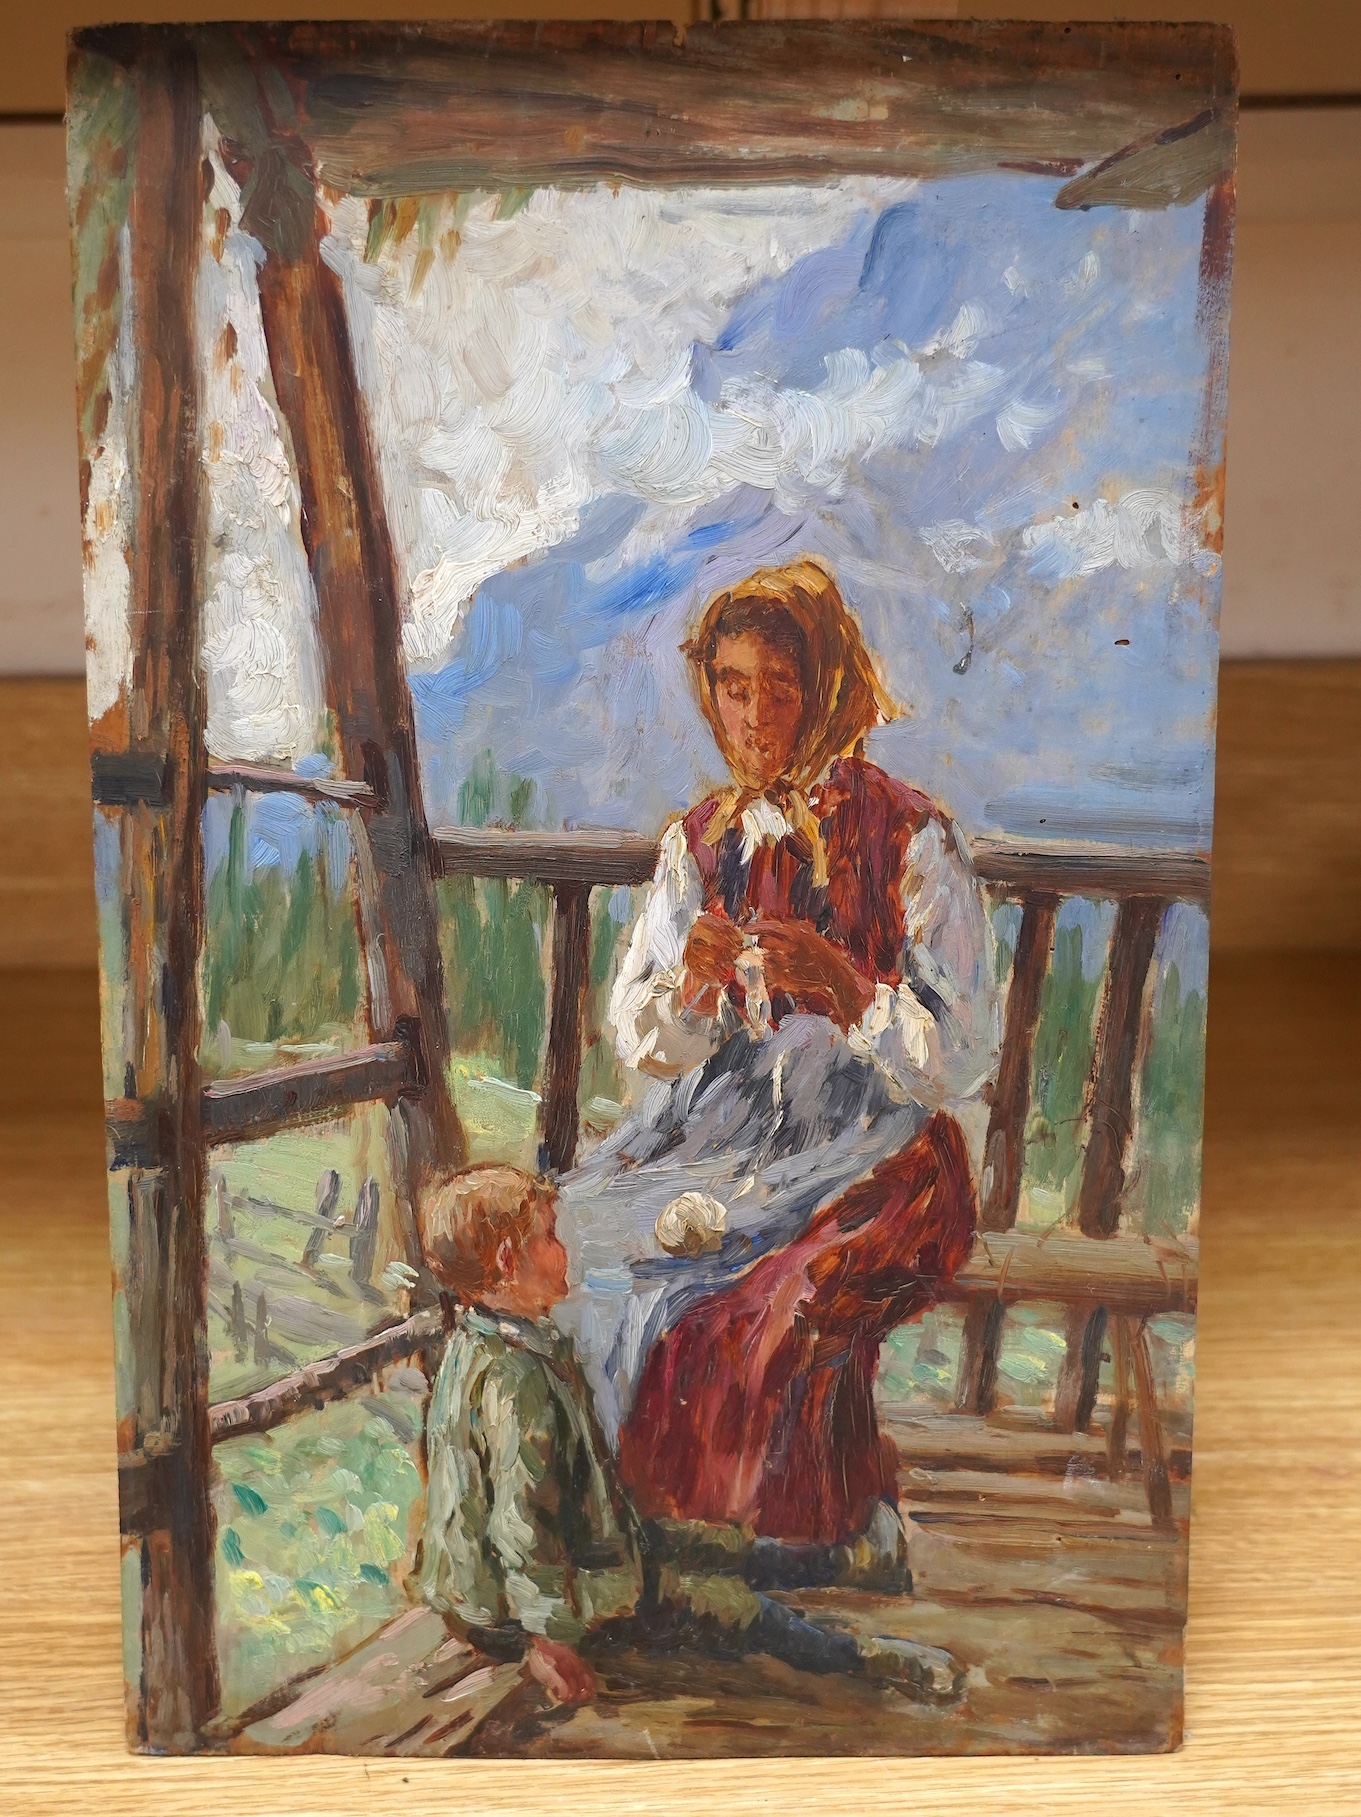 20th century Swiss School, oil on board, Study of a mother and child before mountains, indistinctly inscribed on reverse, 42 x 27cm, unframed